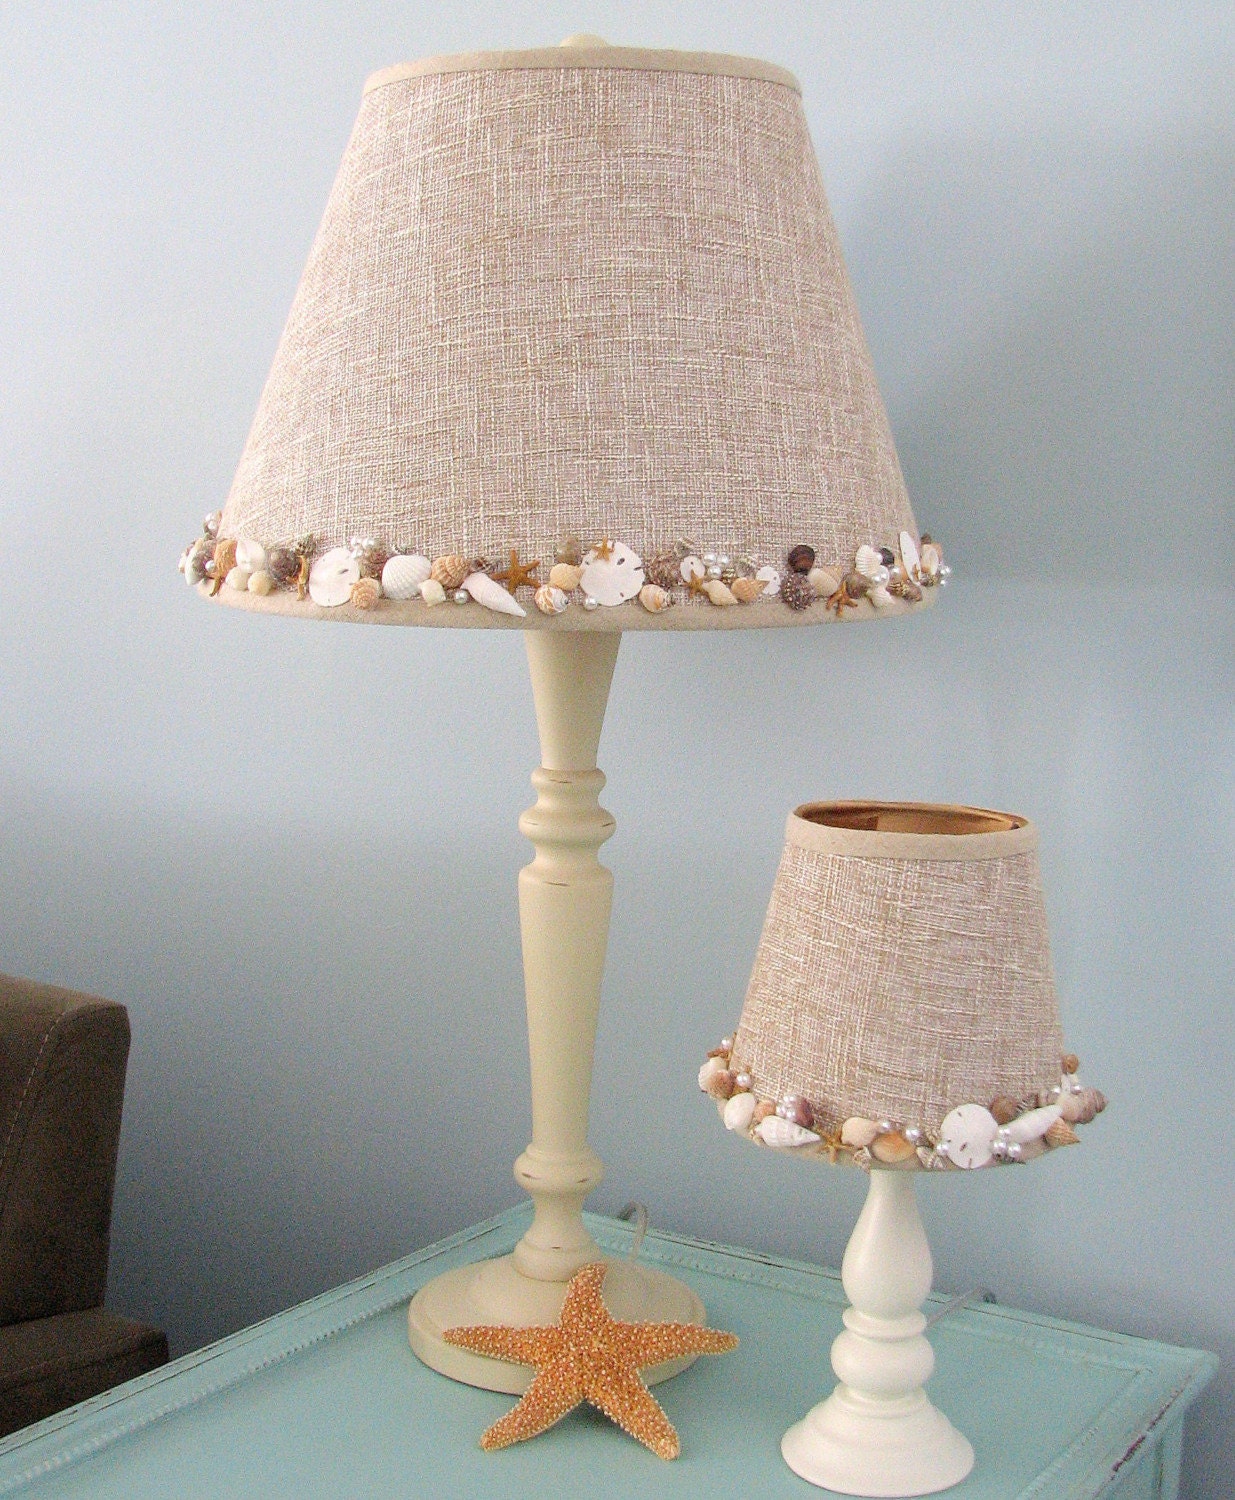 Seashell Lamp Shades on Seashell Lamp With Artisan Embellished Shade By Beachgrasscottage